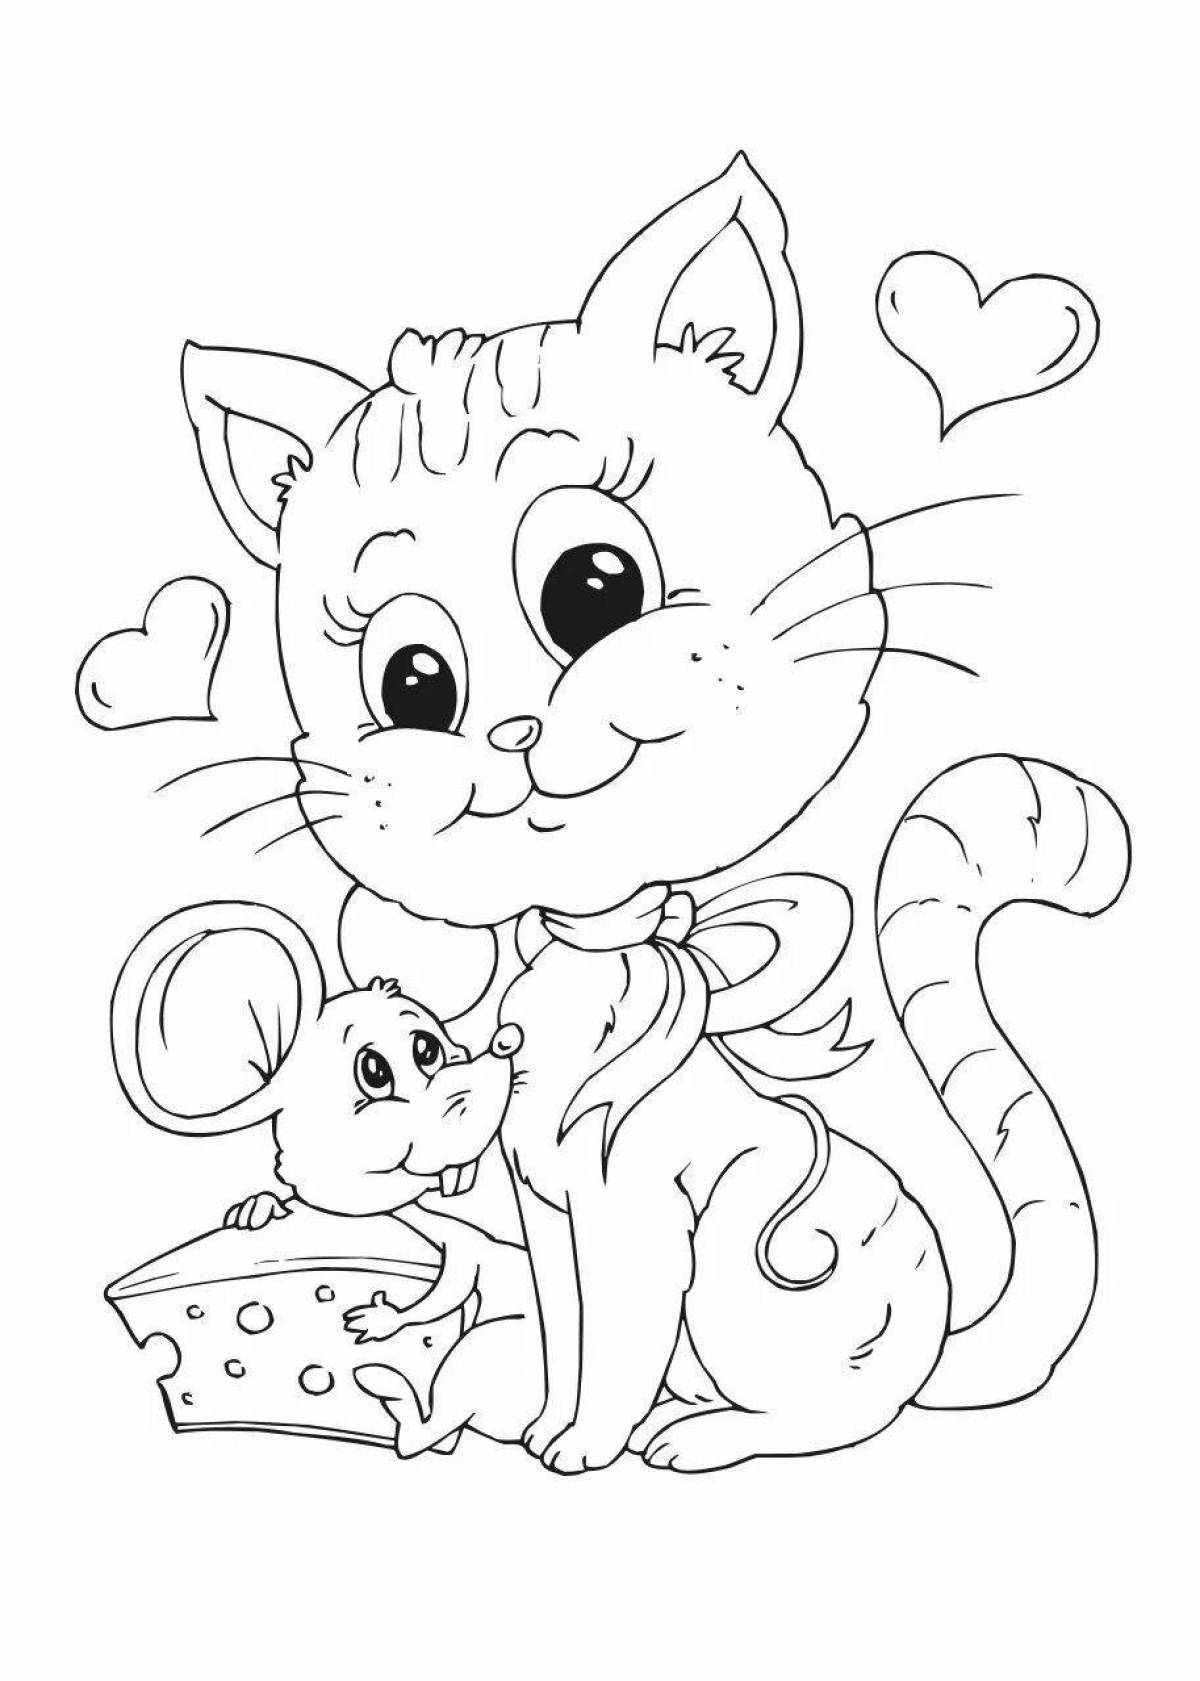 Naughty cat and mouse coloring book